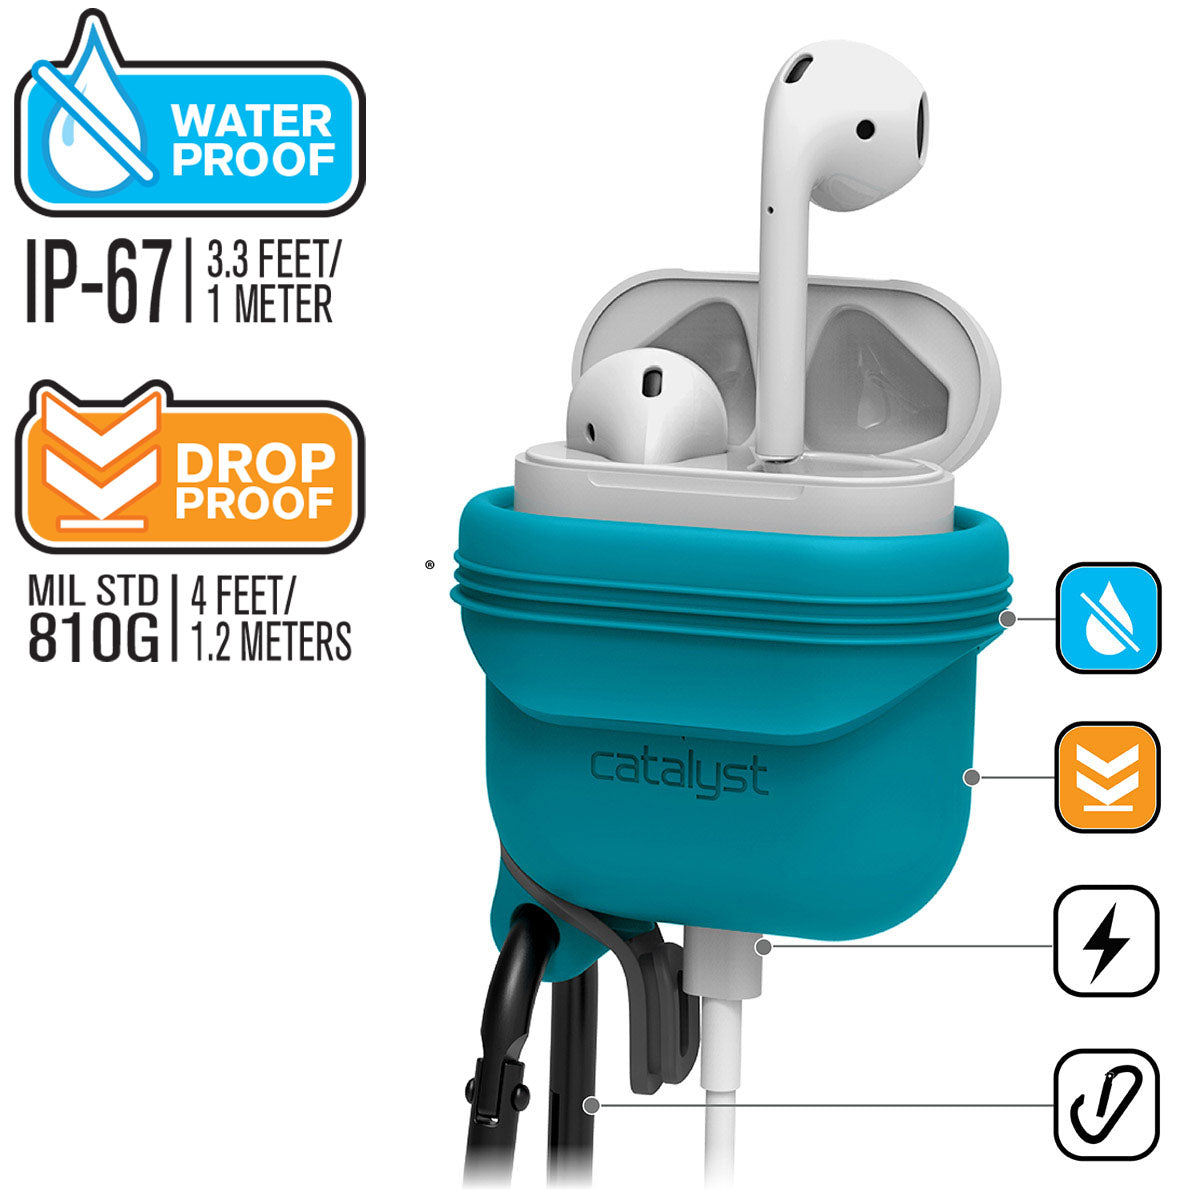 CATAPDTEAL | Catalyst airpods gen2/1 waterproof case + carabiner showing the case drop proof and water proof features in glacier blue text reads water proof IP-67 3.3 FEET/1 METER DROP PROOF MIL STD 810G 1.2 METERS